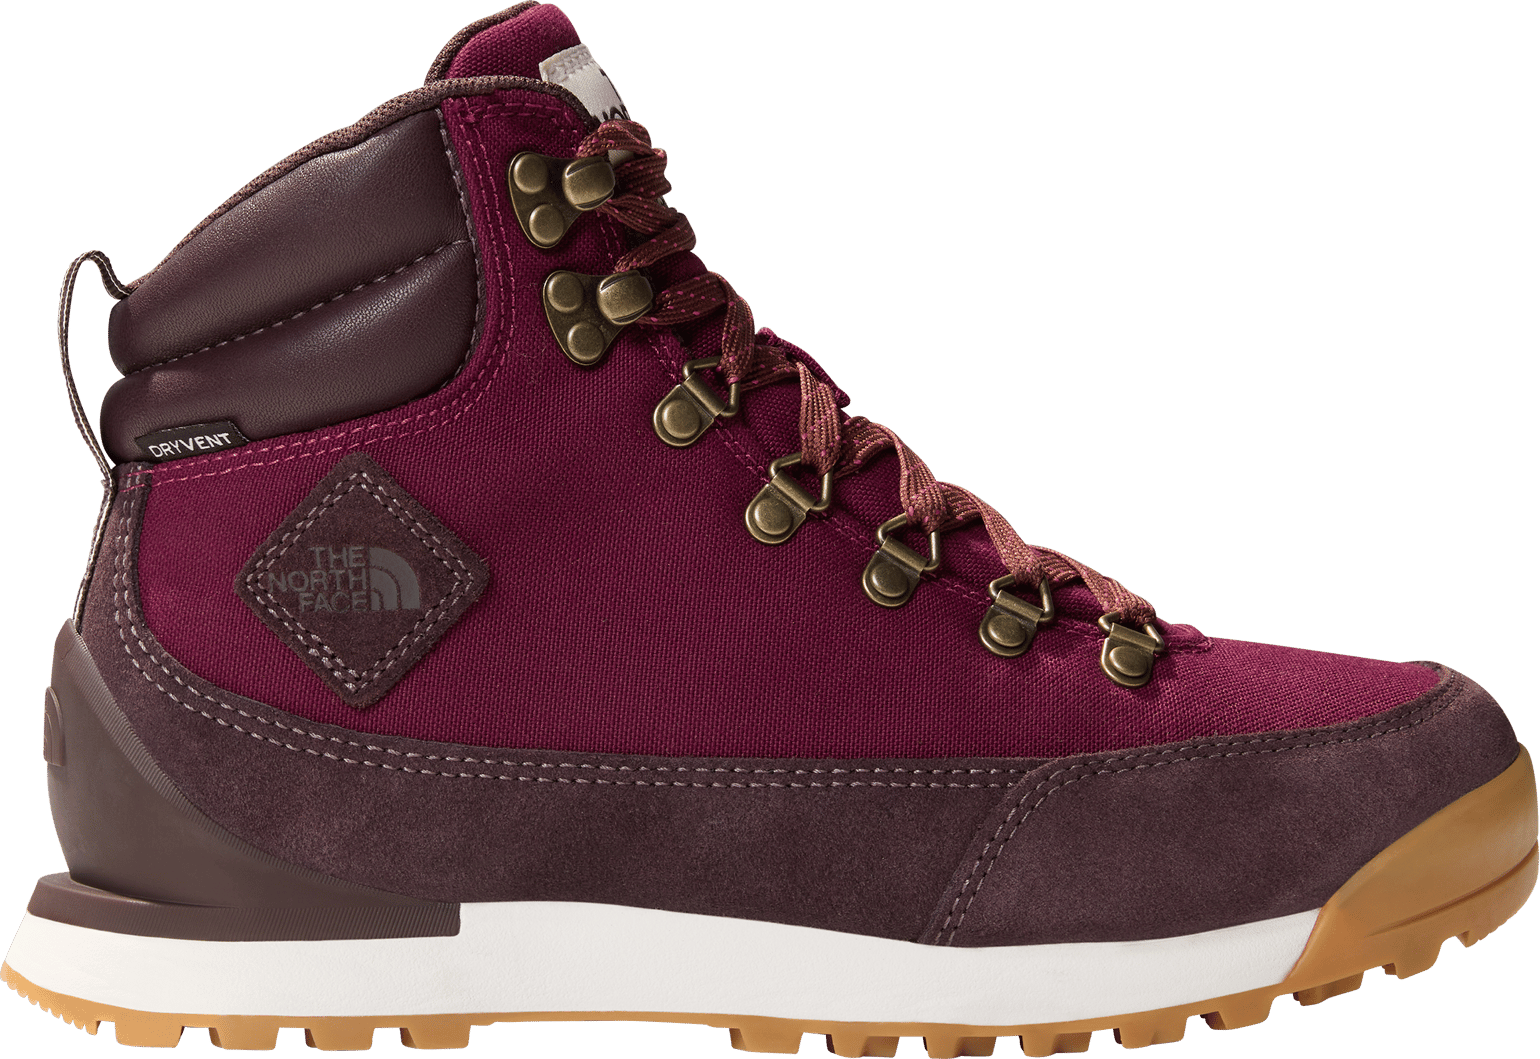 The North Face Women's Back-to-Berkeley IV Textile Lifestyle Boots Boysenberry/Coal Brown